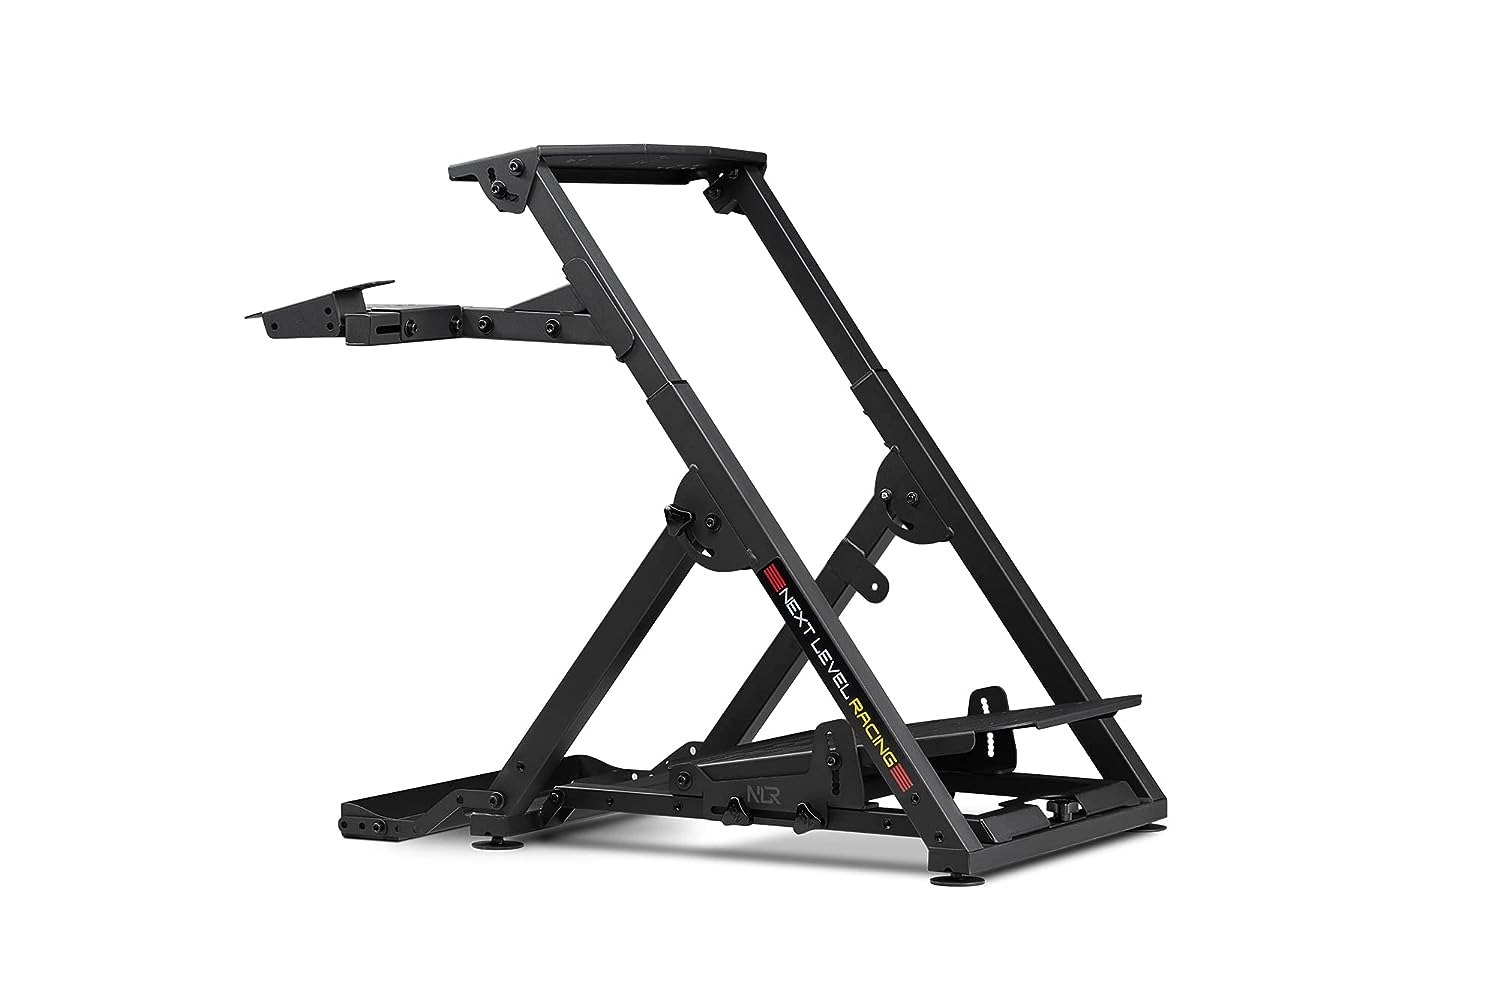 Next Level Racing Wheel Stand 2.0 (NLR-S023) (Factory Reconditioned) $199.99 Free Shipping w/Prime